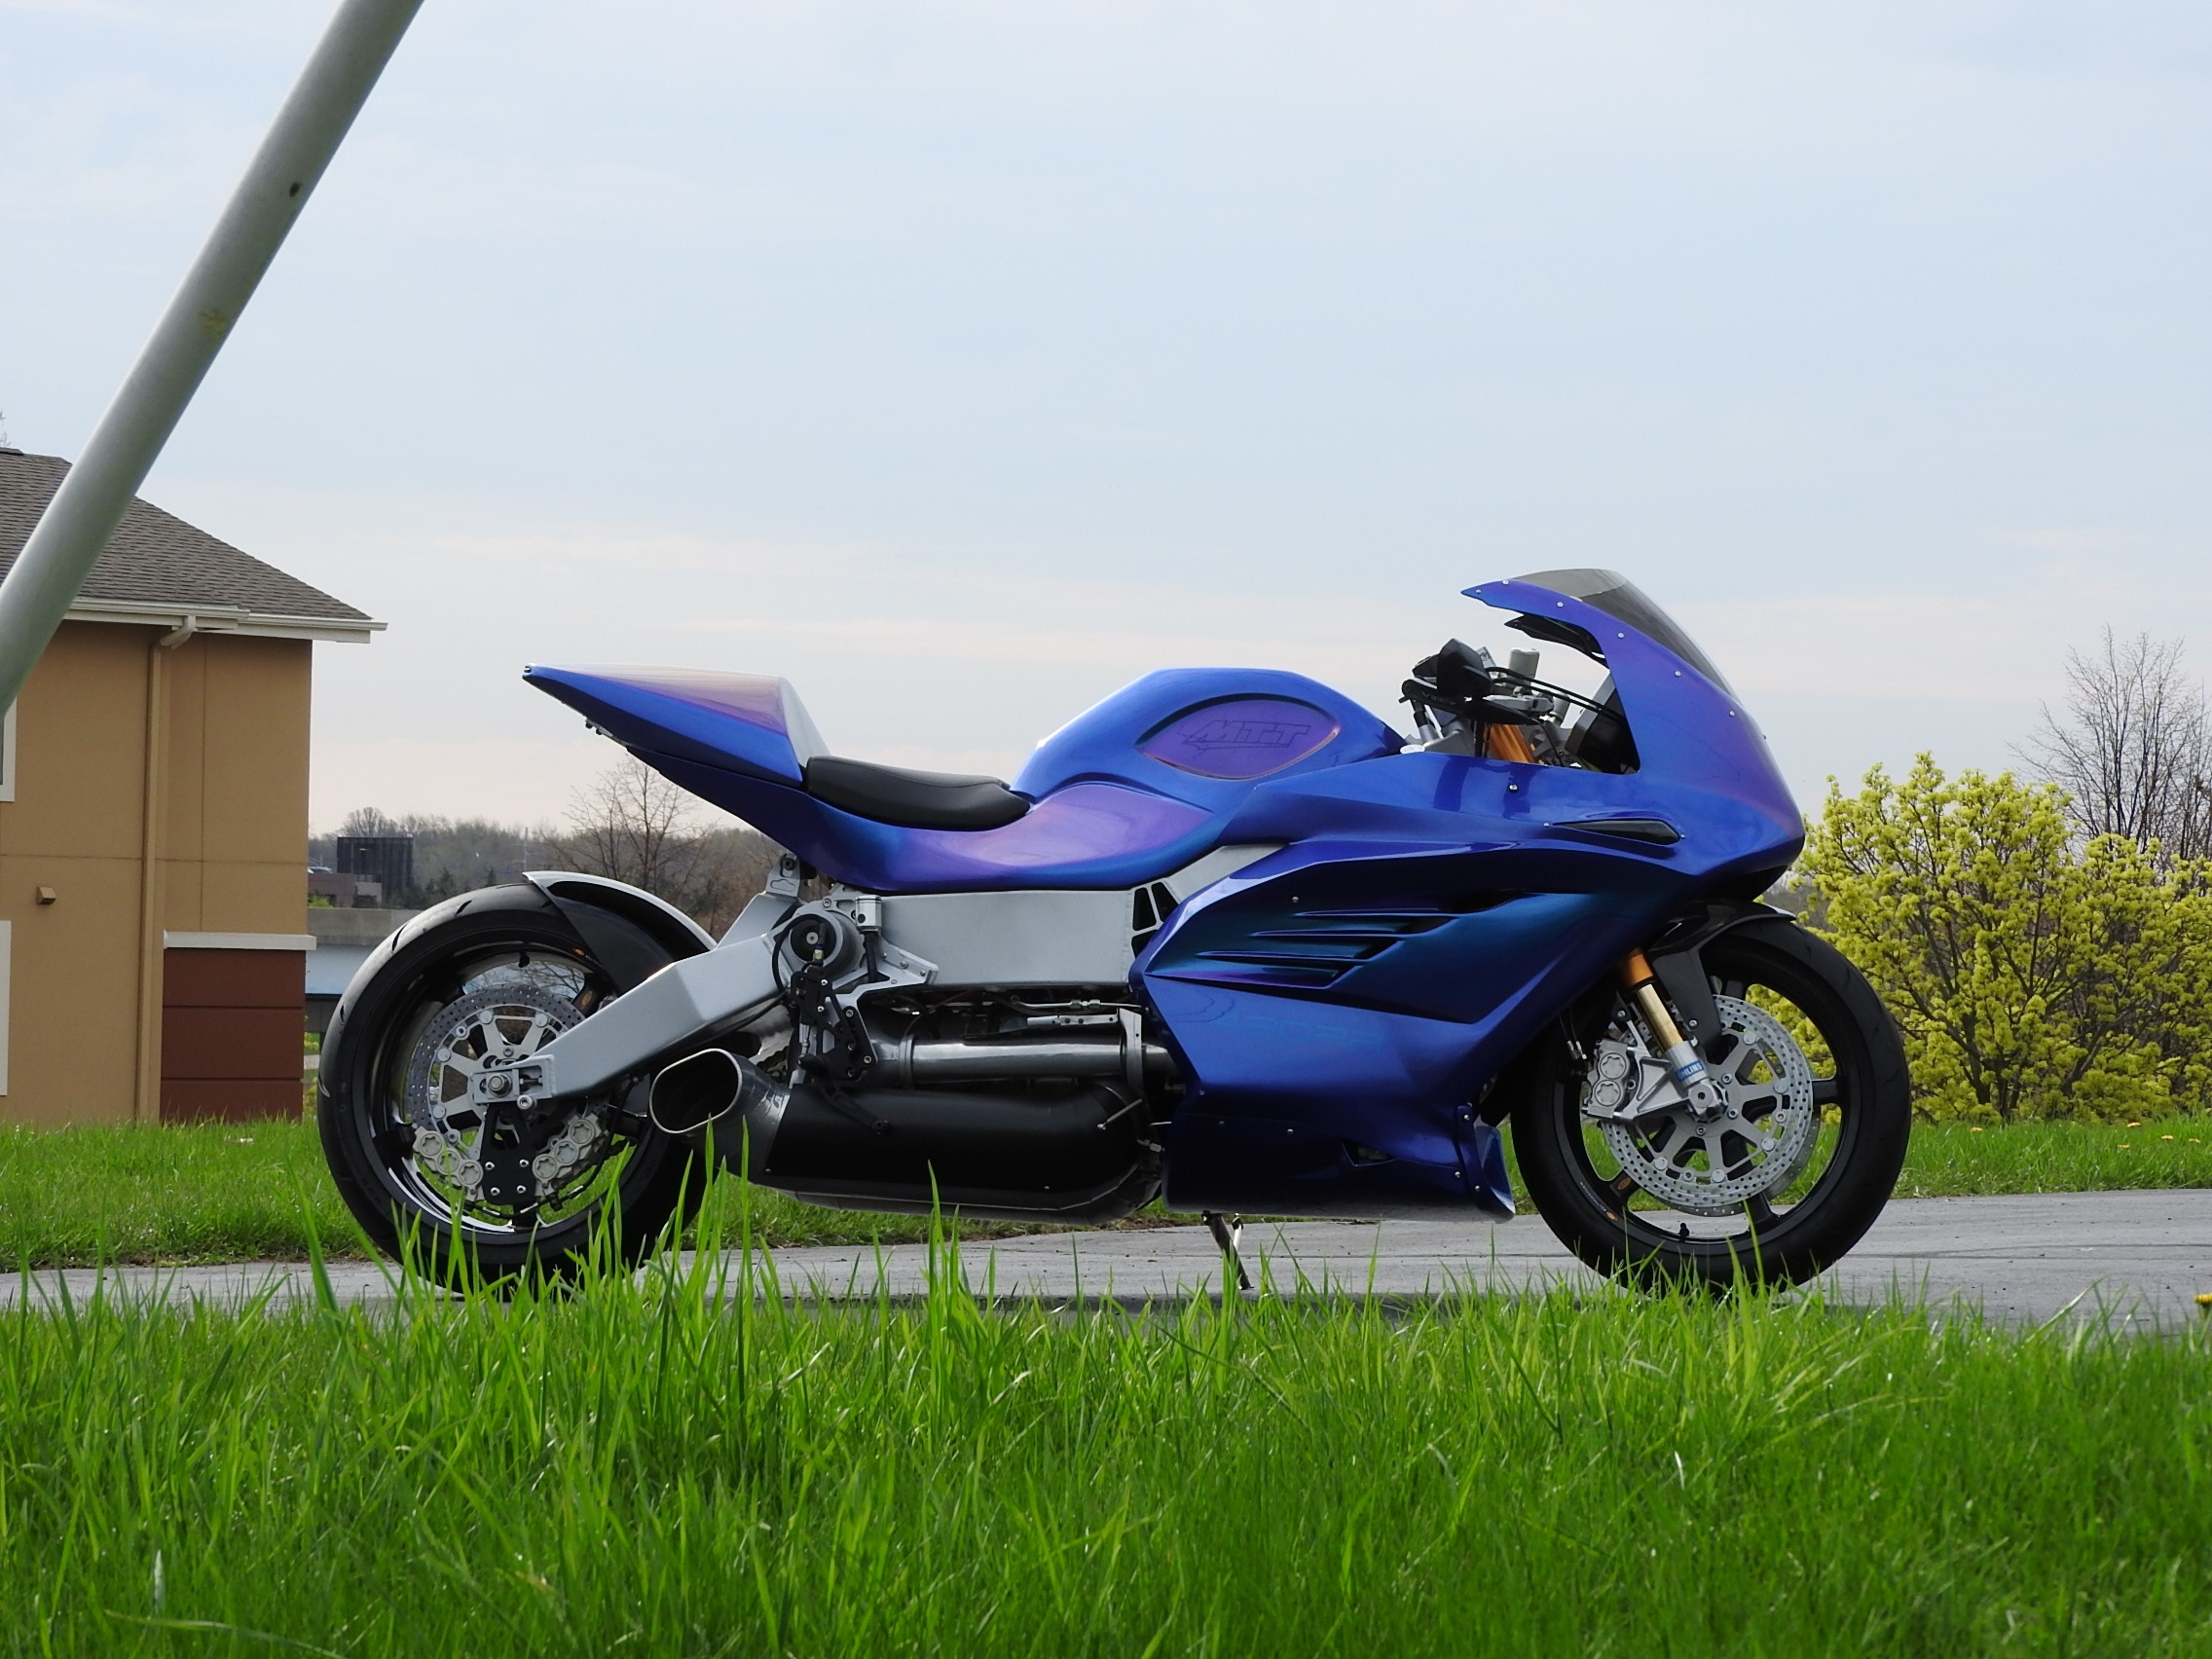 MTT Y2K Superbike: The First Turbine-Powered Street Legal Motorcycle!